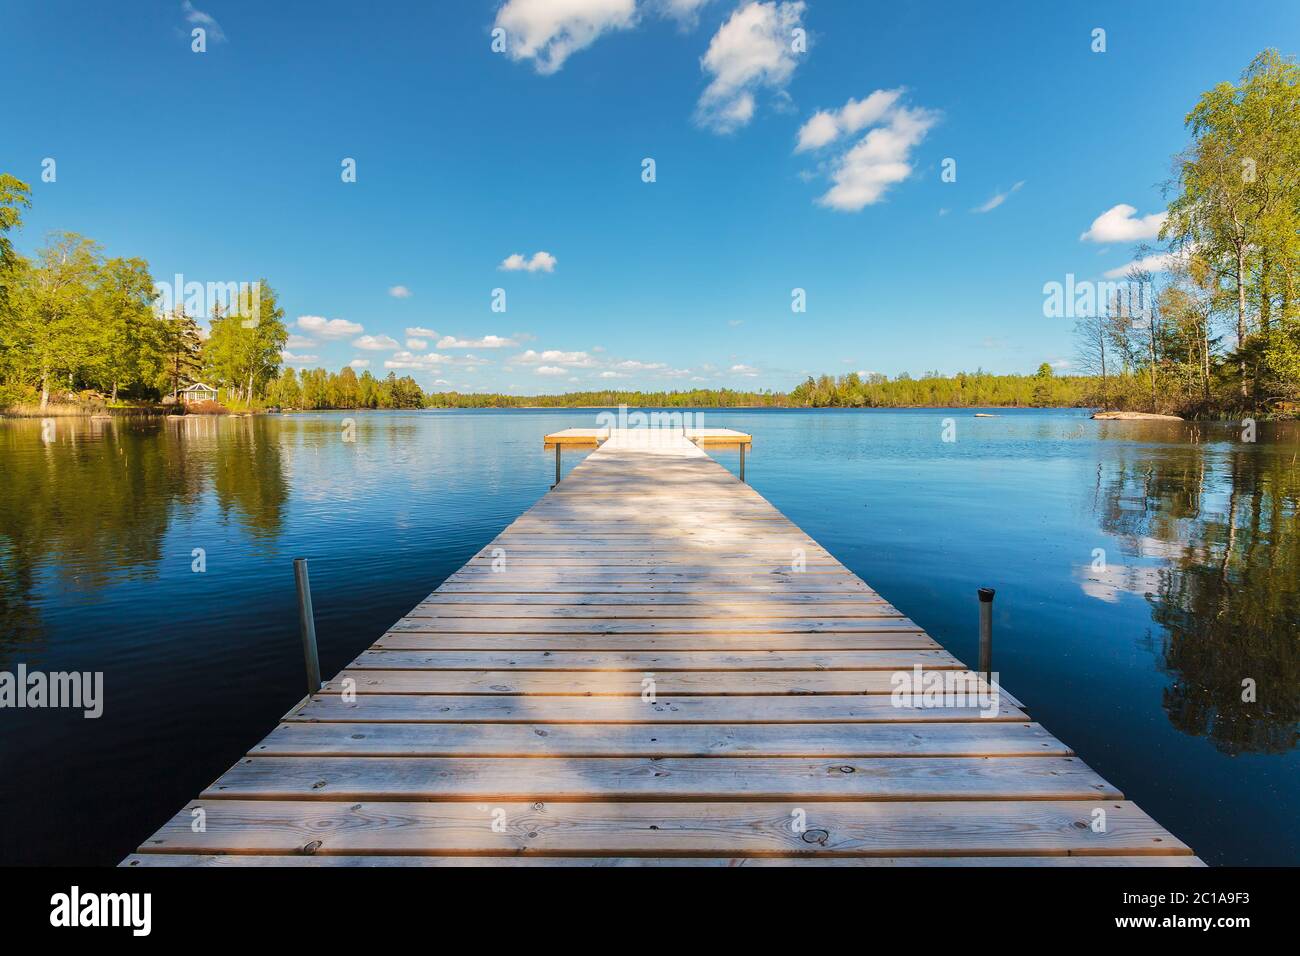 Deserted wooden jetty on a sunny day in the province of Smaland in Sweden Stock Photo